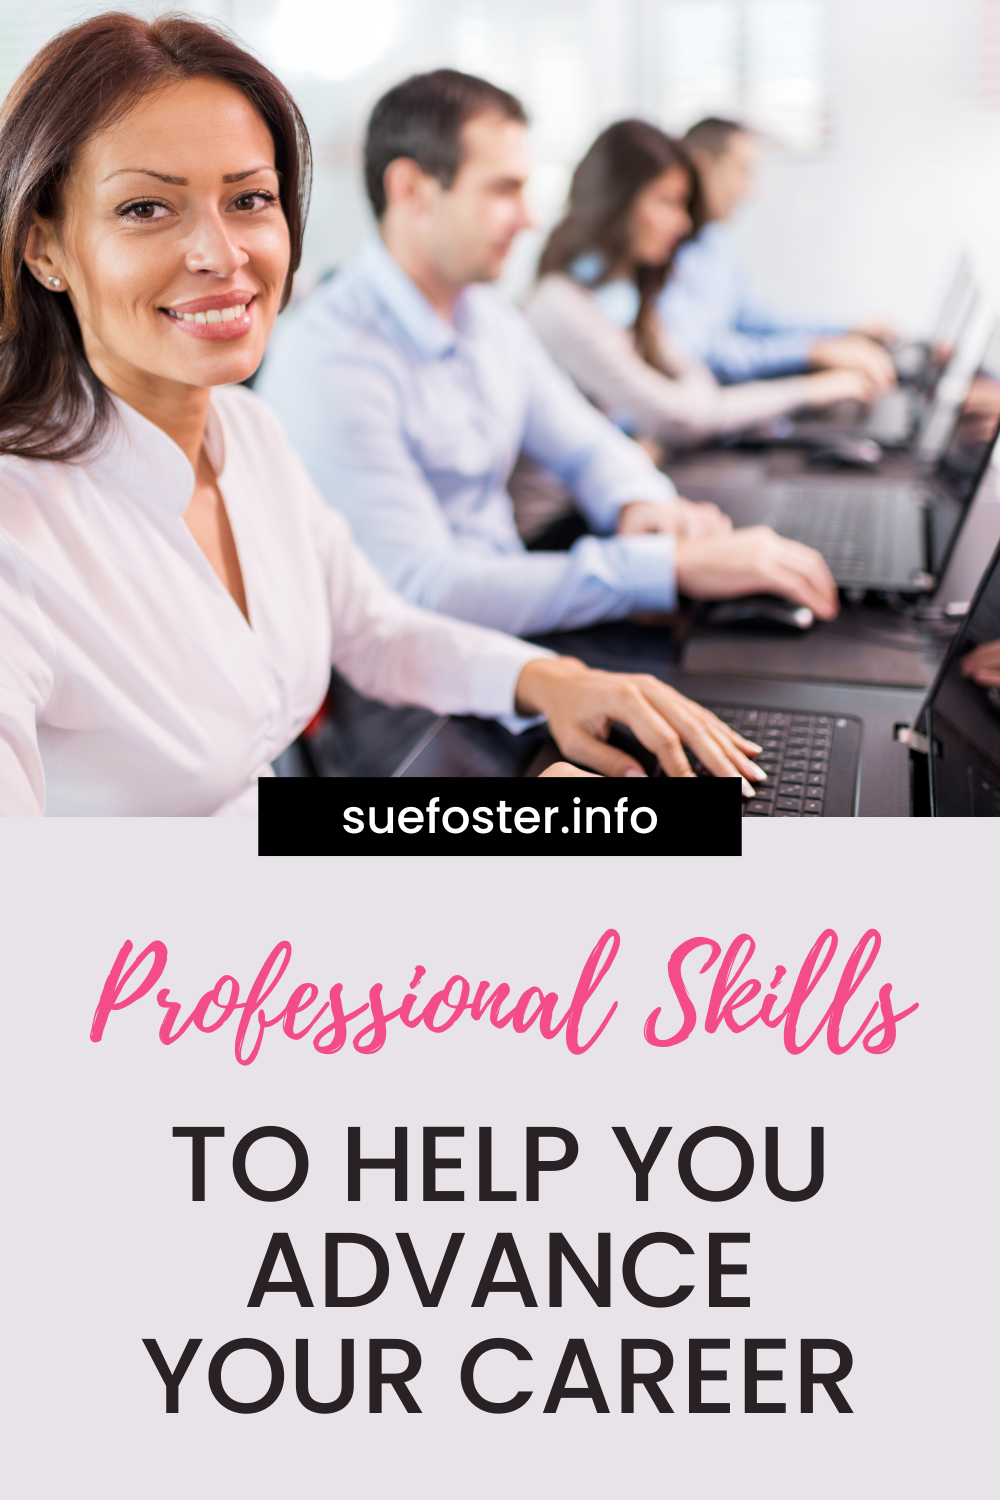 To achieve success in your career, investing in yourself is essential. Learn the professional skills that can help you move up the corporate ladder.